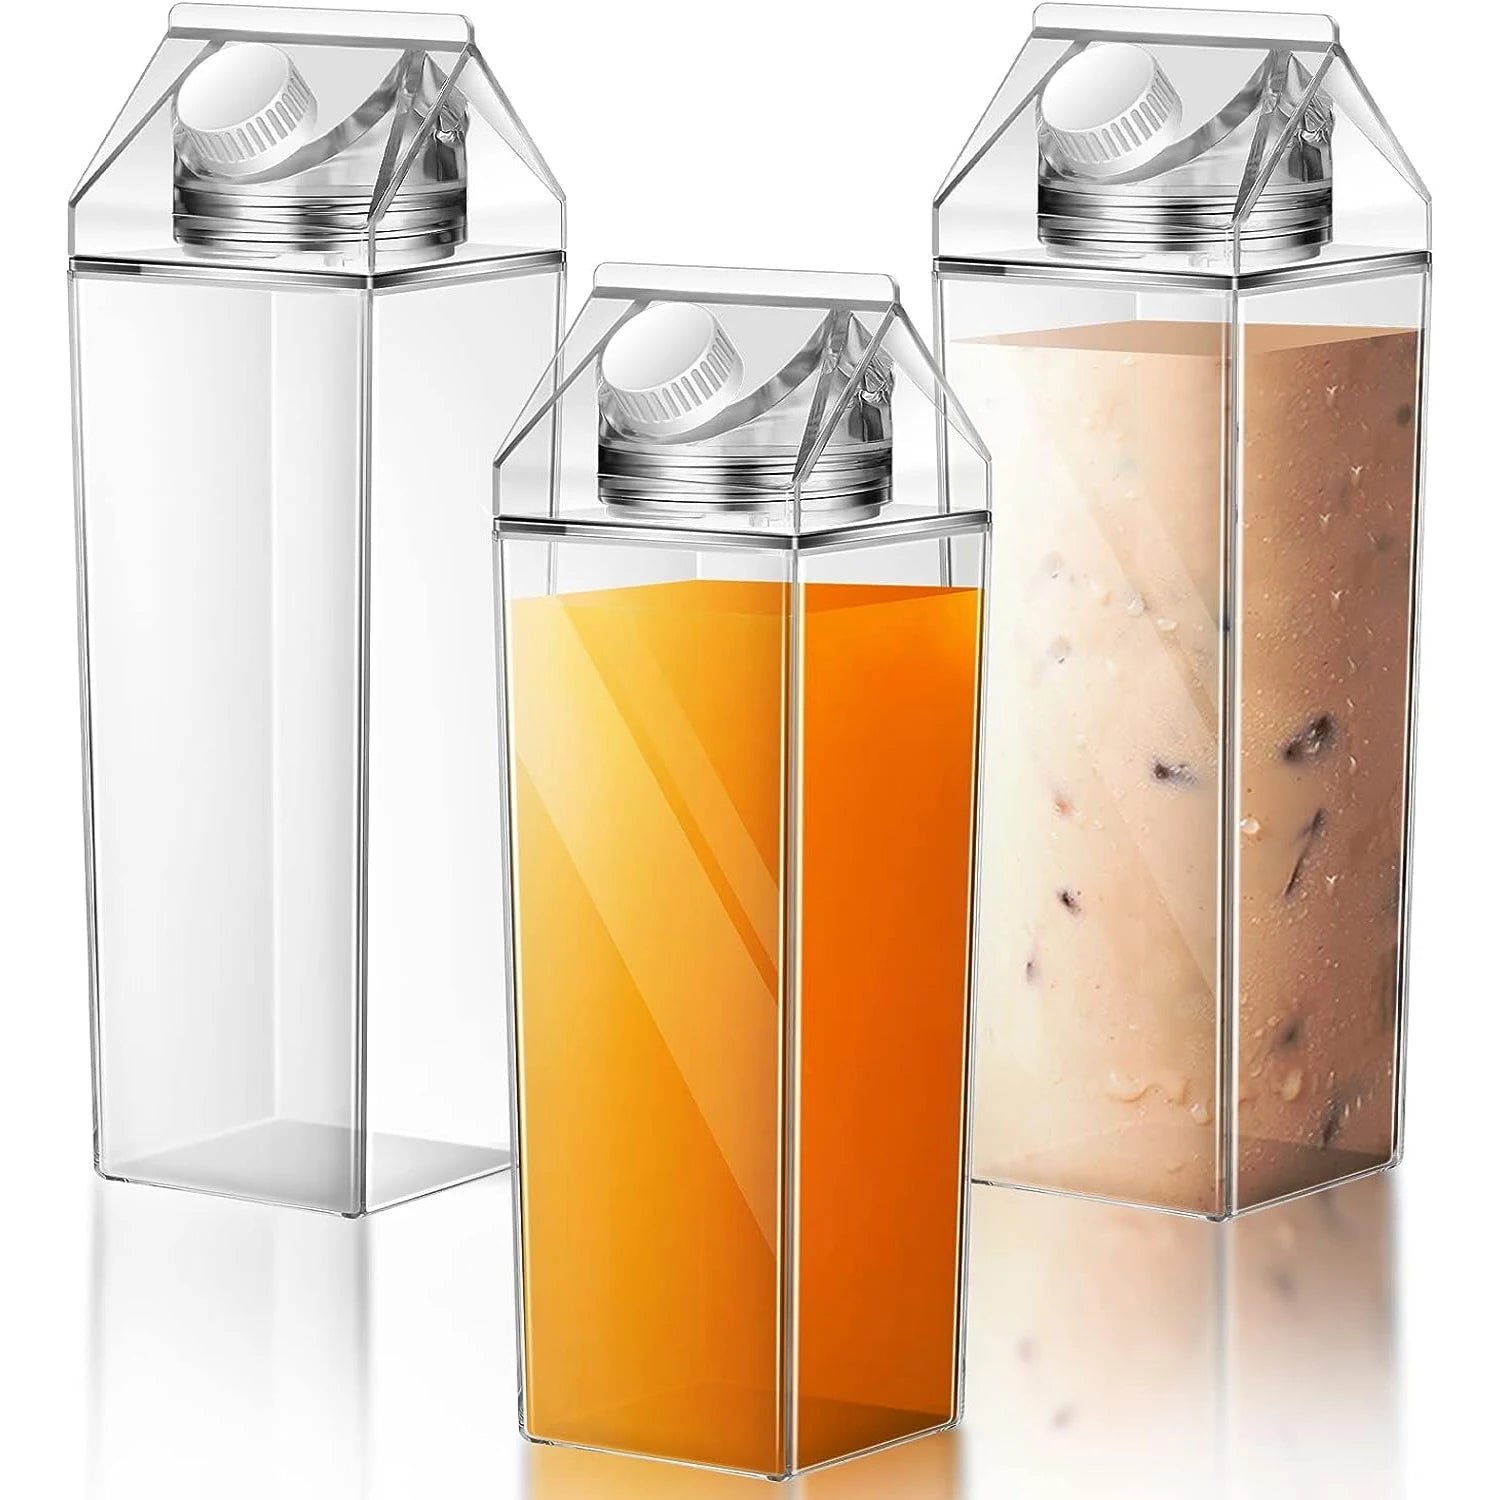 1000ML Square Plastic Milk Carton Water Bottle for Sports, Camping, and Gym 3pcs-1000ML / 500-1000ML